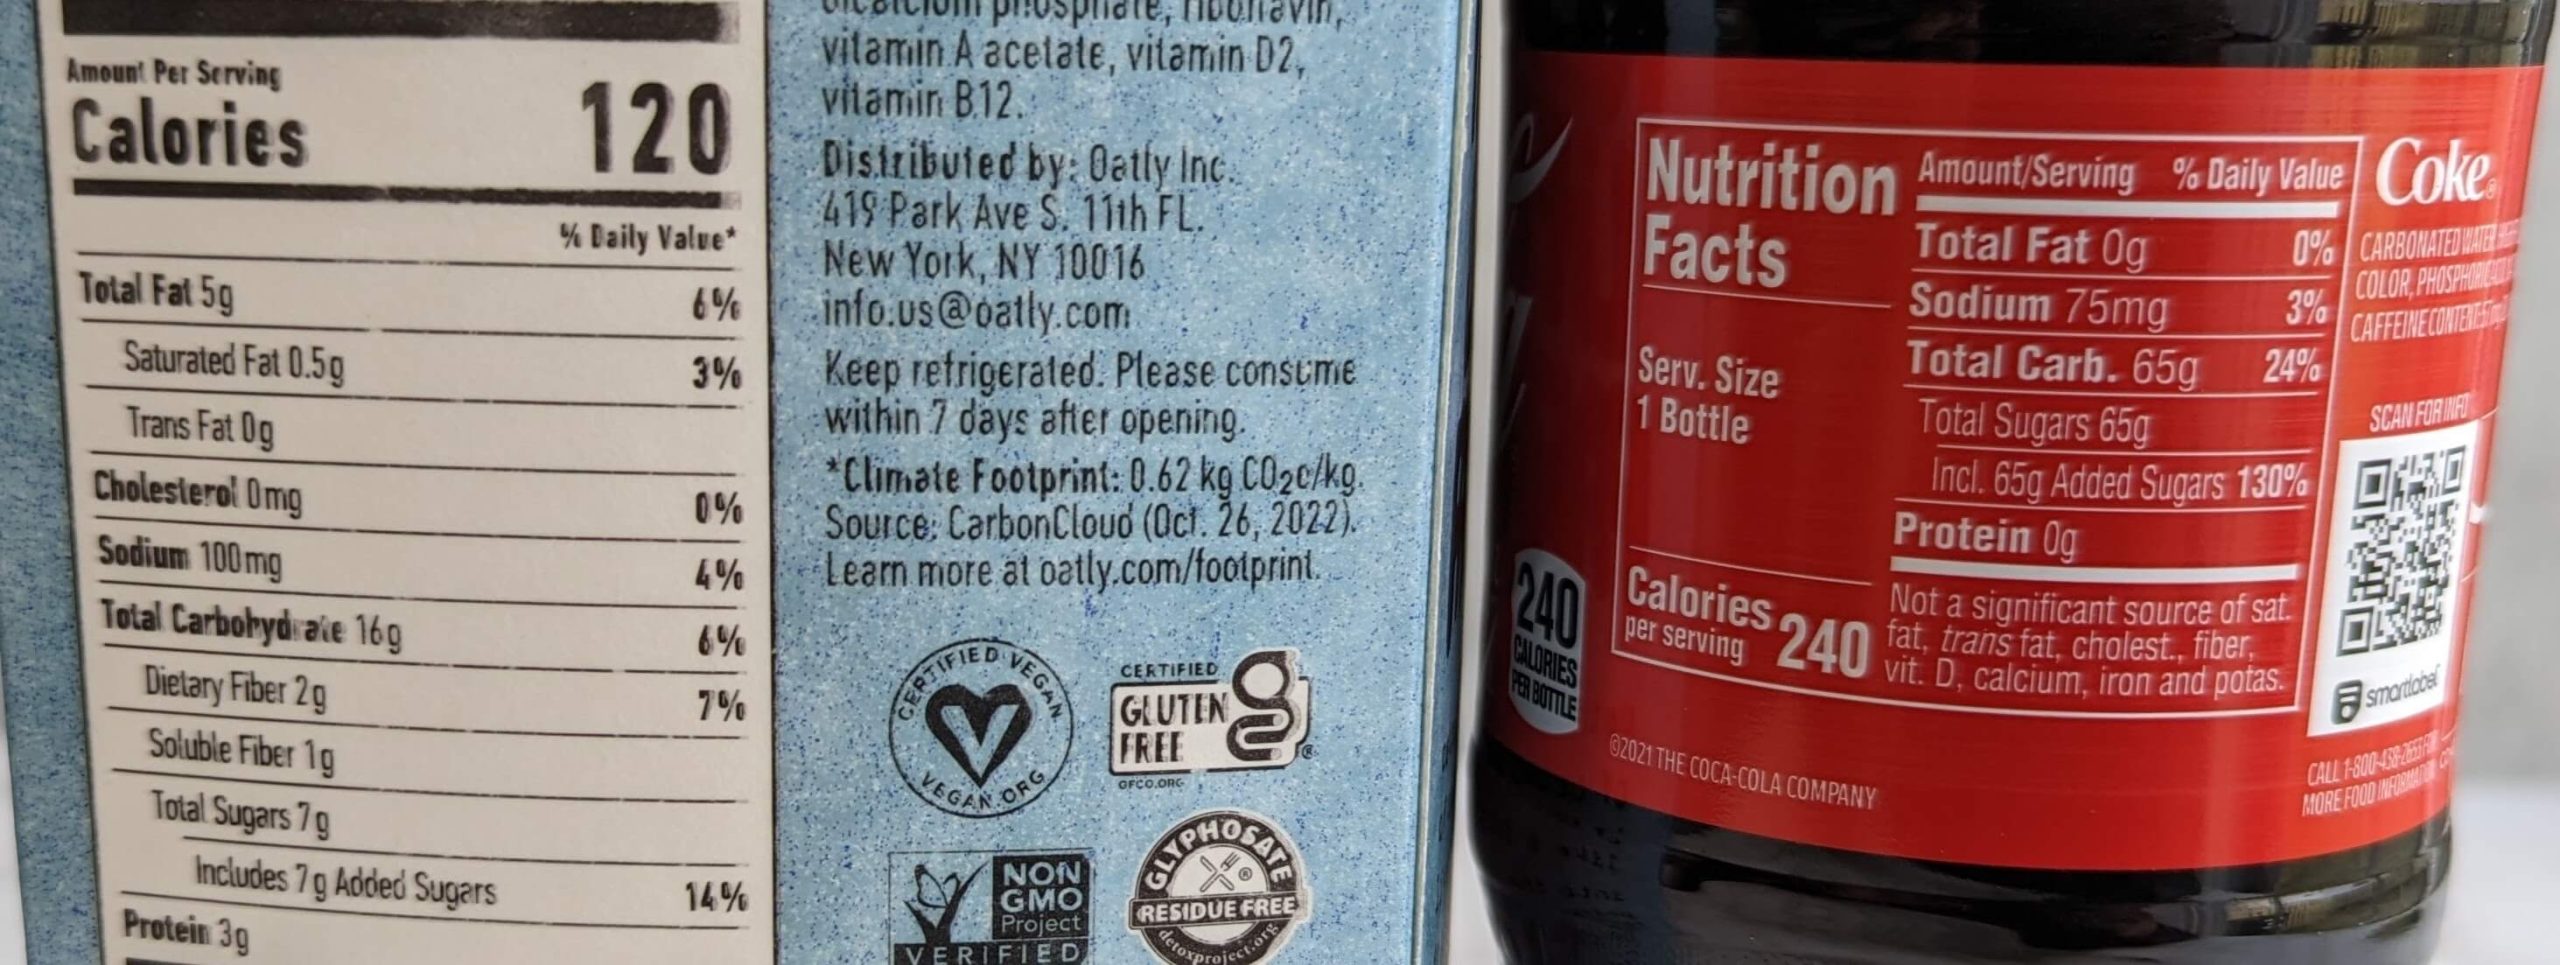 oatly and coca-cola nutrition facts side-by-side